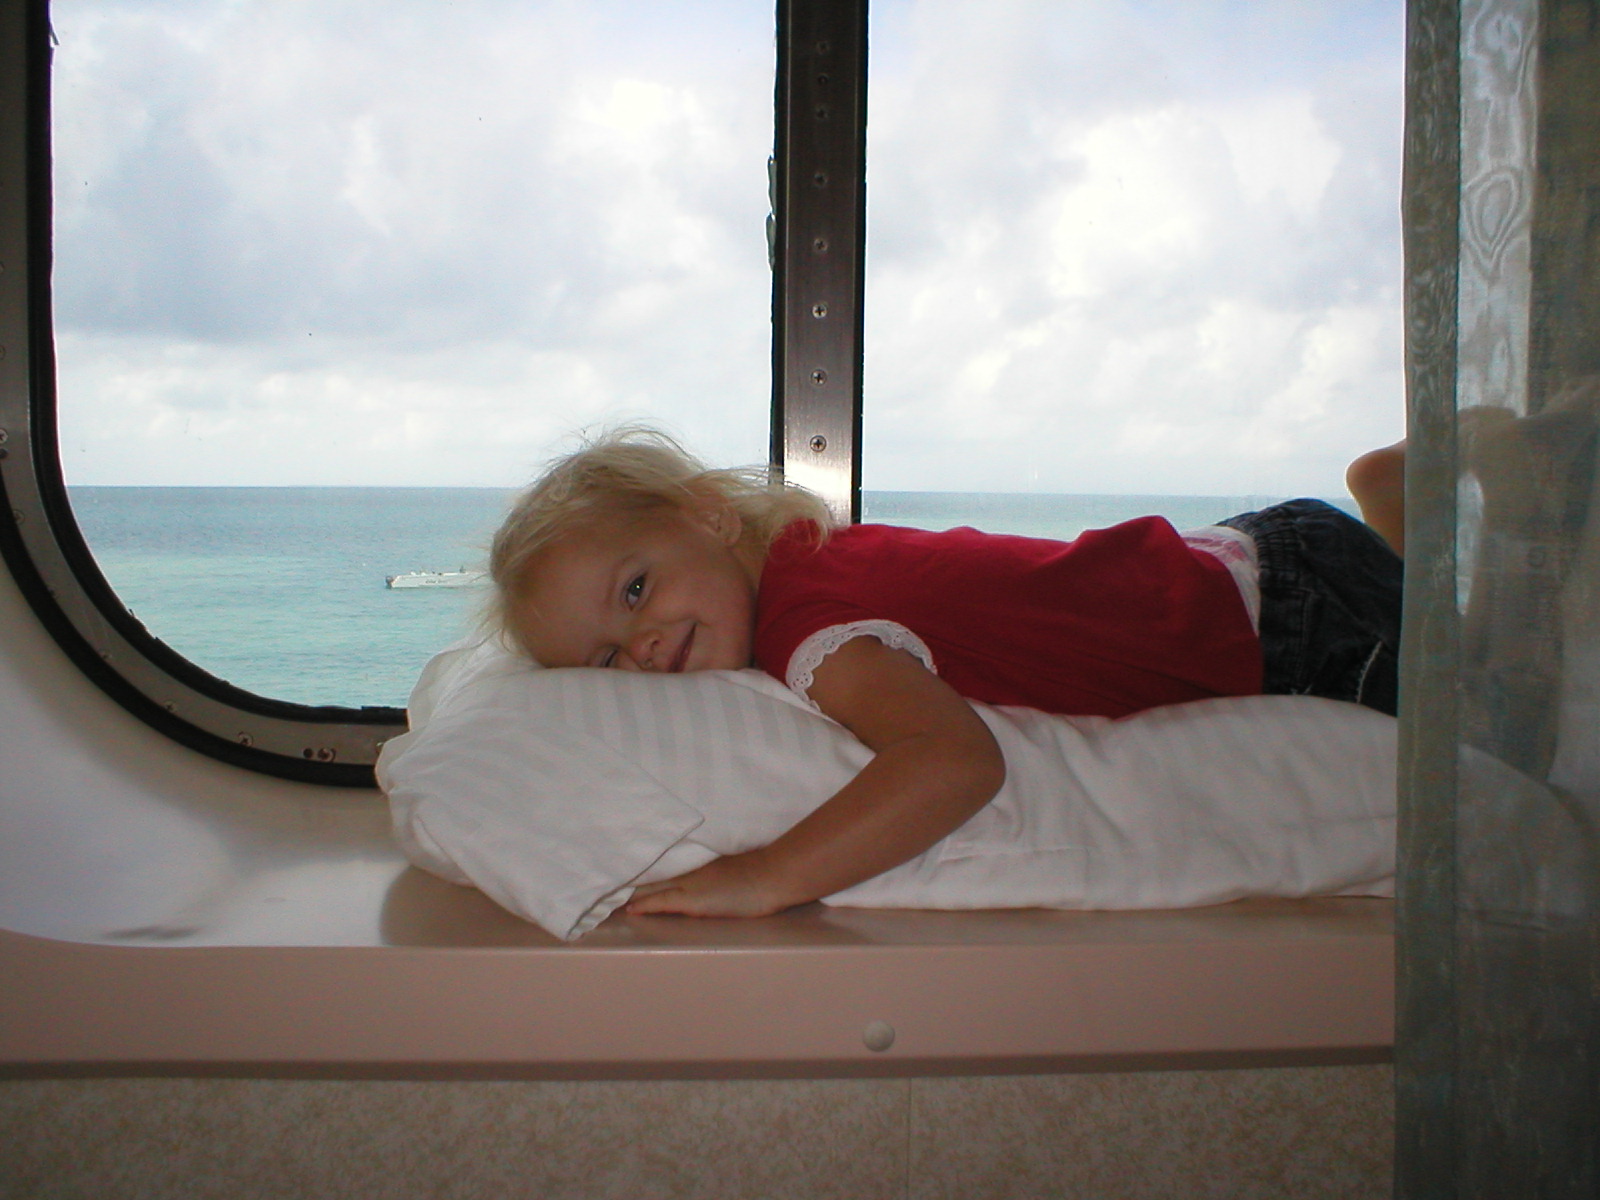 Belize - watching the tenders from the window!